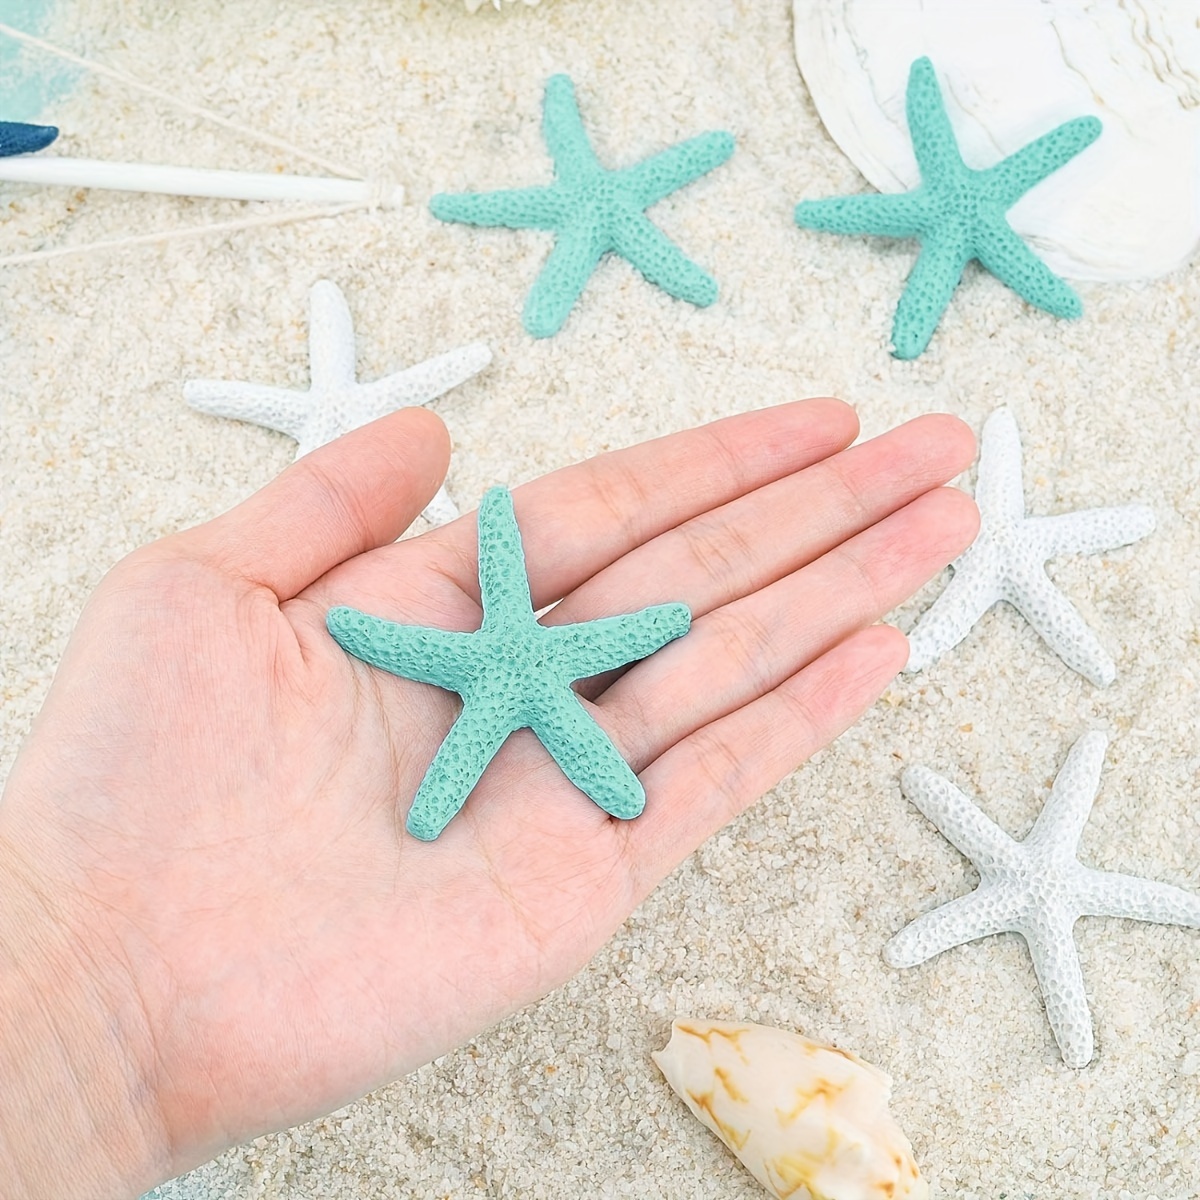 

Resin Starfish Decorations, Set Of 12, Coastal Beach Theme Nautical Vase Fillers For Home Decor, Ocean-inspired Flatback Starfish Accents For Wedding, Party & Christmas Tree